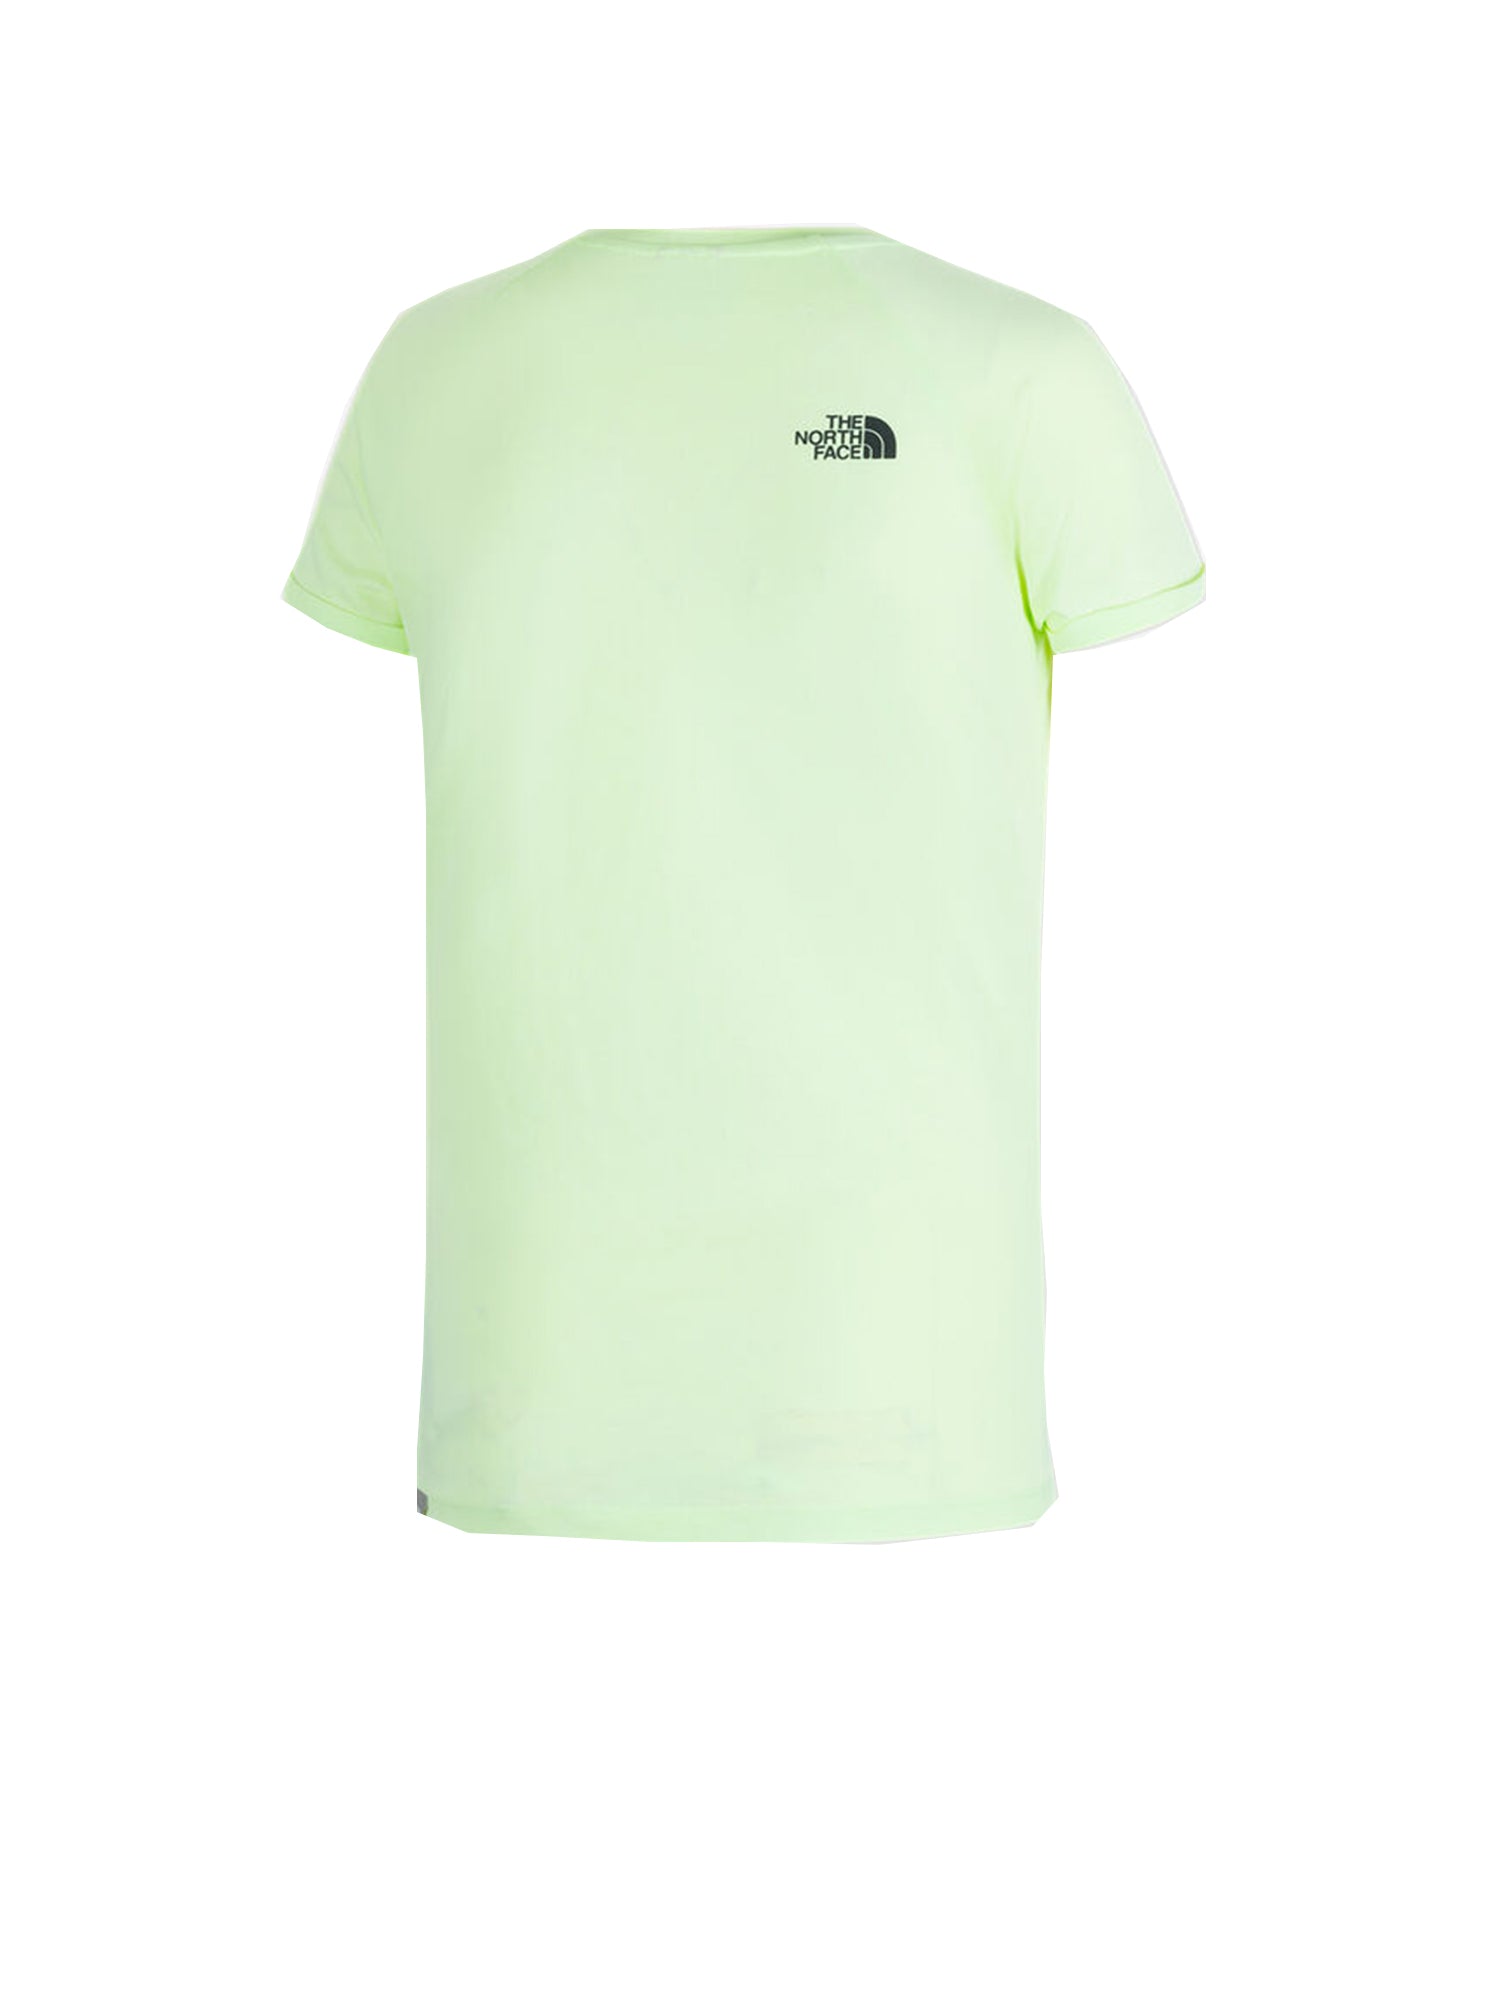 THE NORTH FACE T-SHIRT NEW ODLES LOGO VERDE LIME